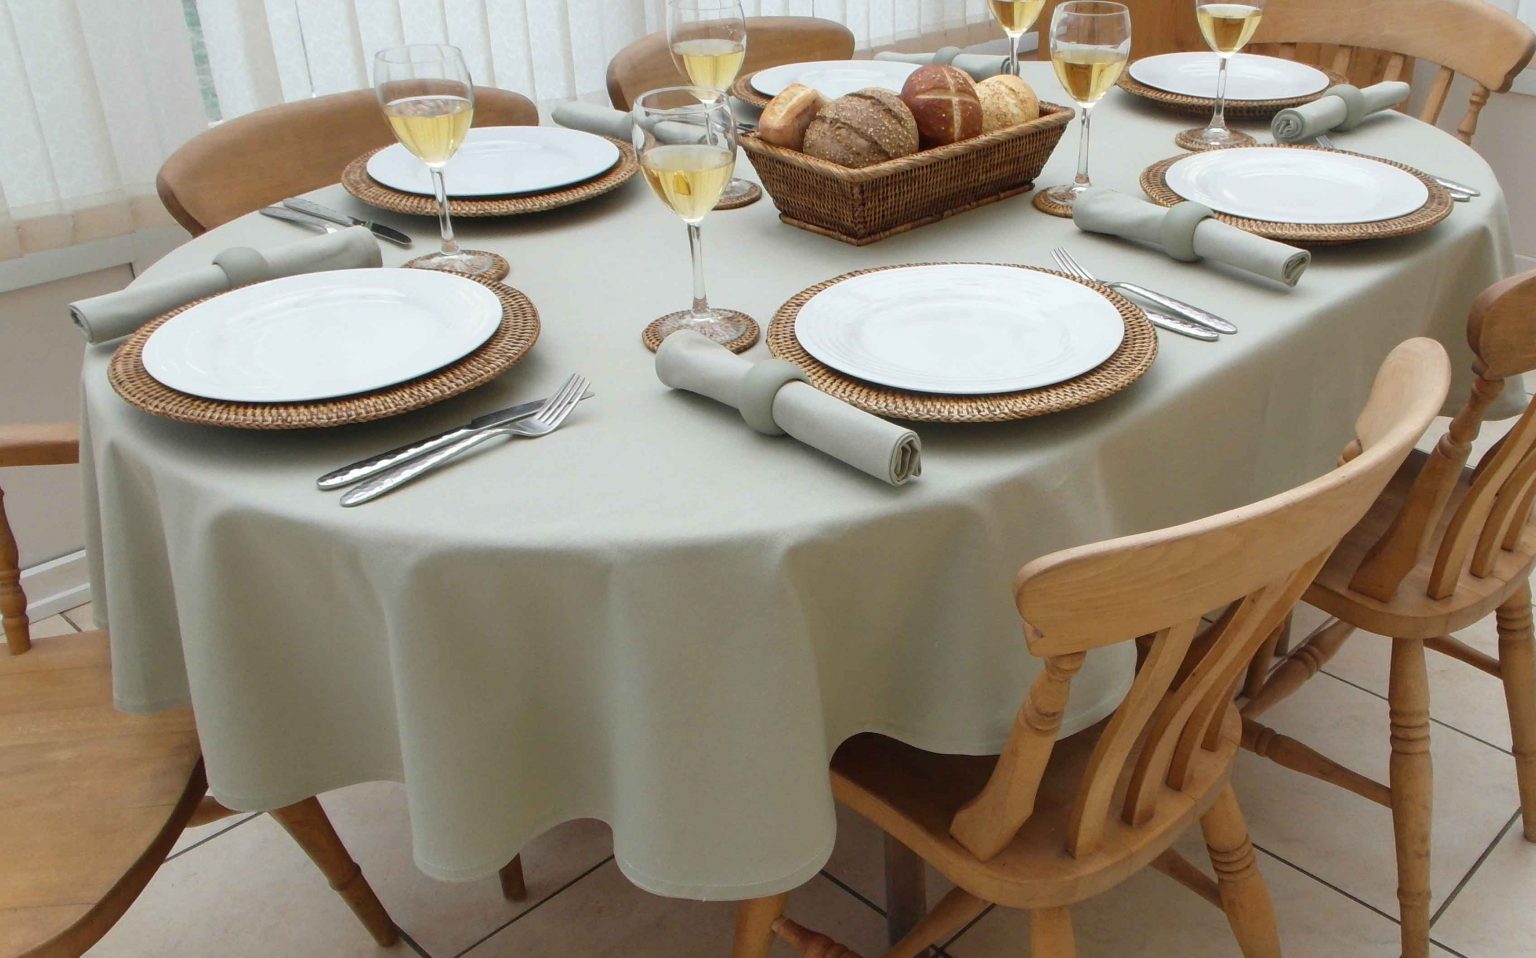 Pictures Of Dining Room Tables With Tablecloths